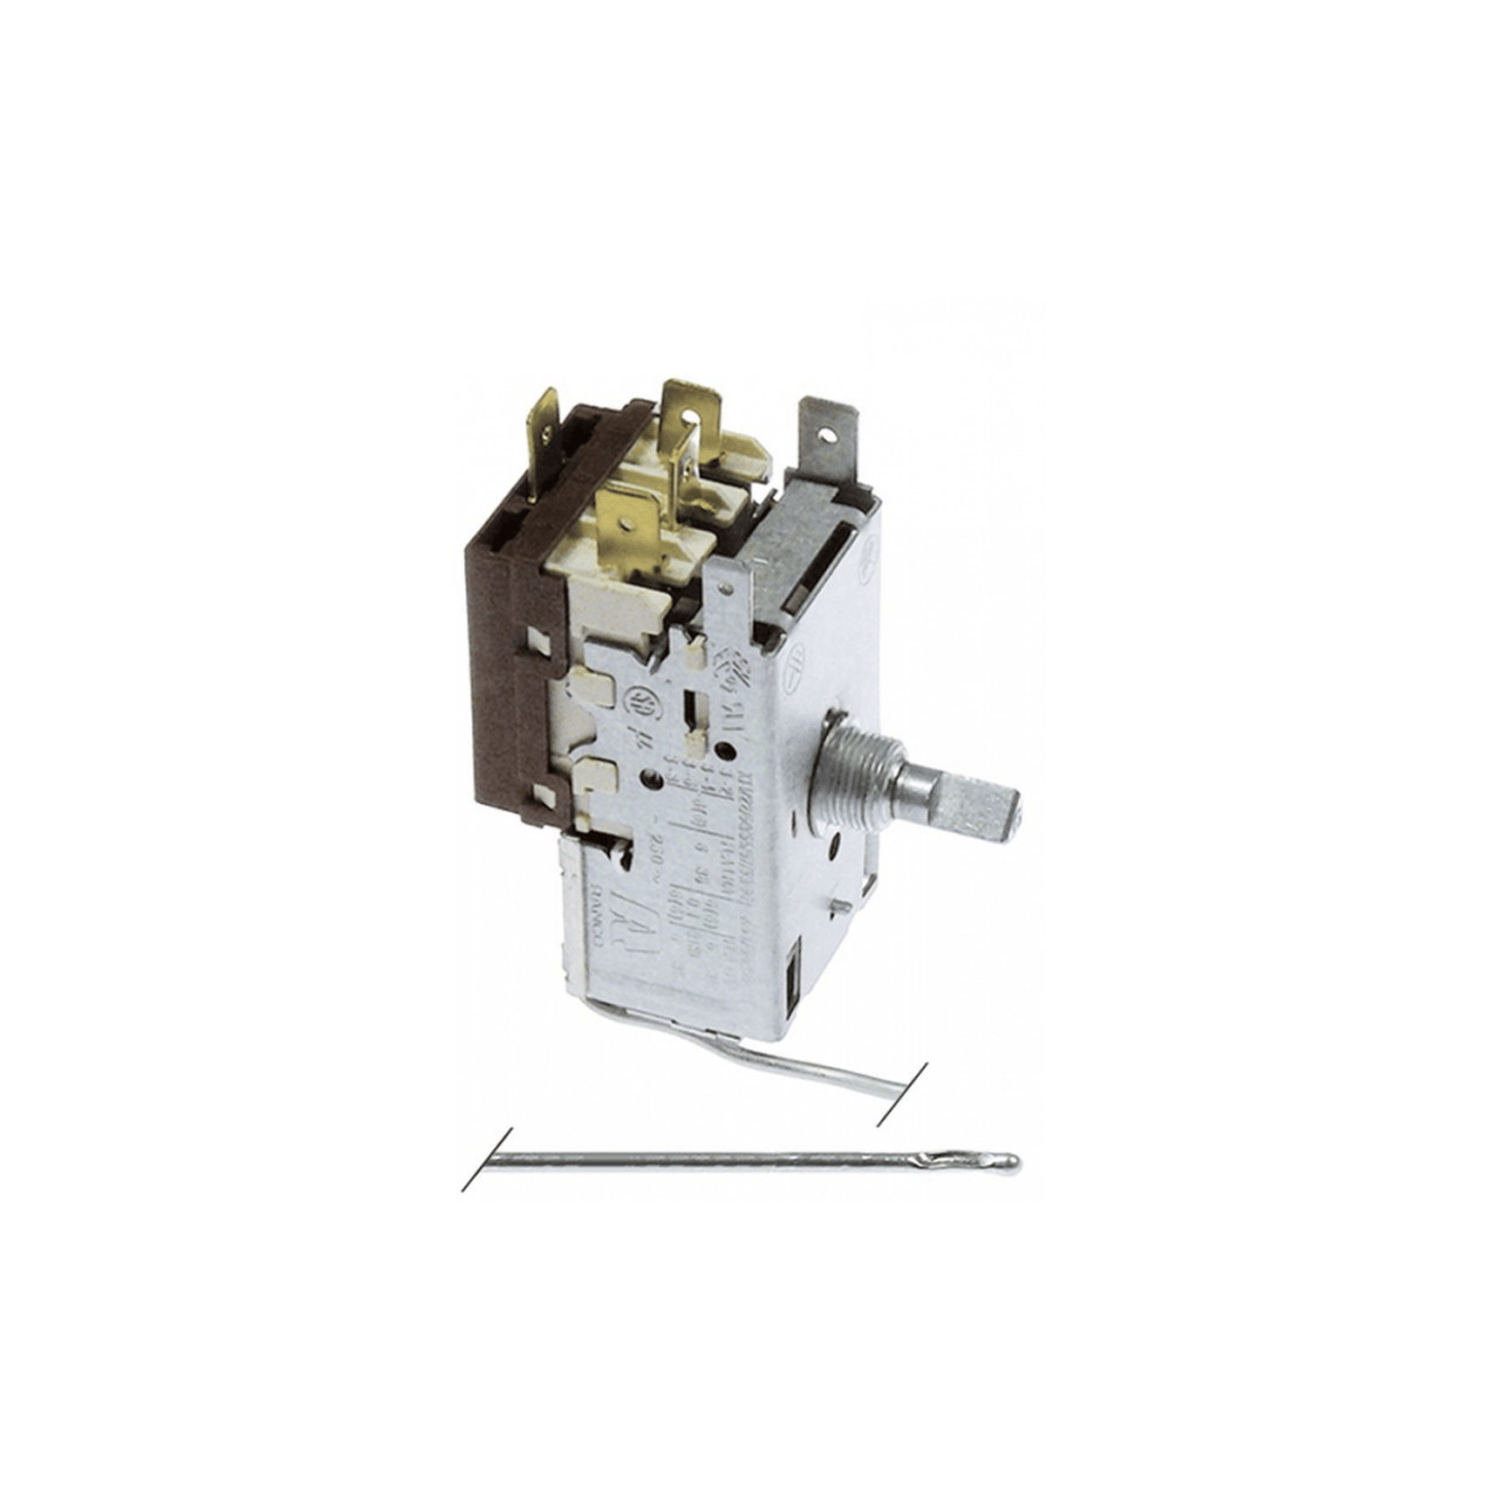 THERMOSTAT for evaporator Ranco K61-L1501,4 contacts 6A 250V, capillary tube 1800 mm, cold -18°C, warm -8°C